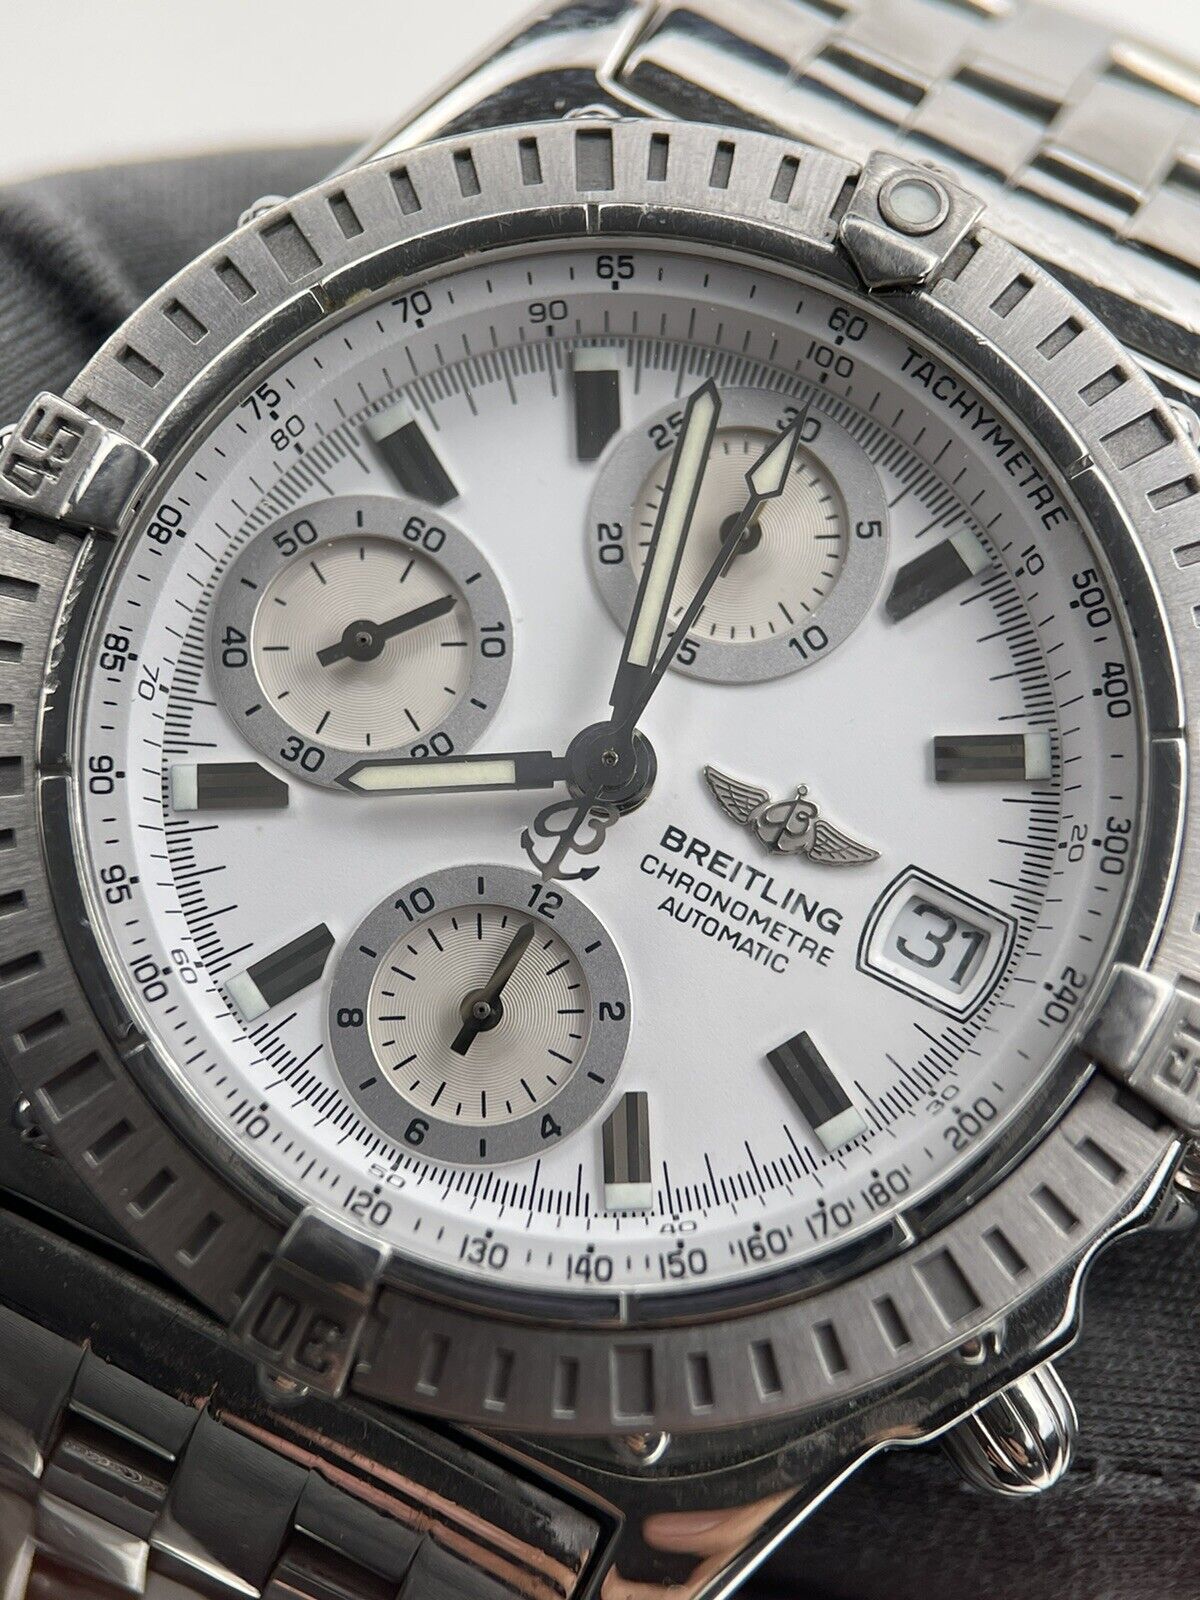 Breitling Chronomat A13352 39mm White Dial Automatic Chronograph Watch